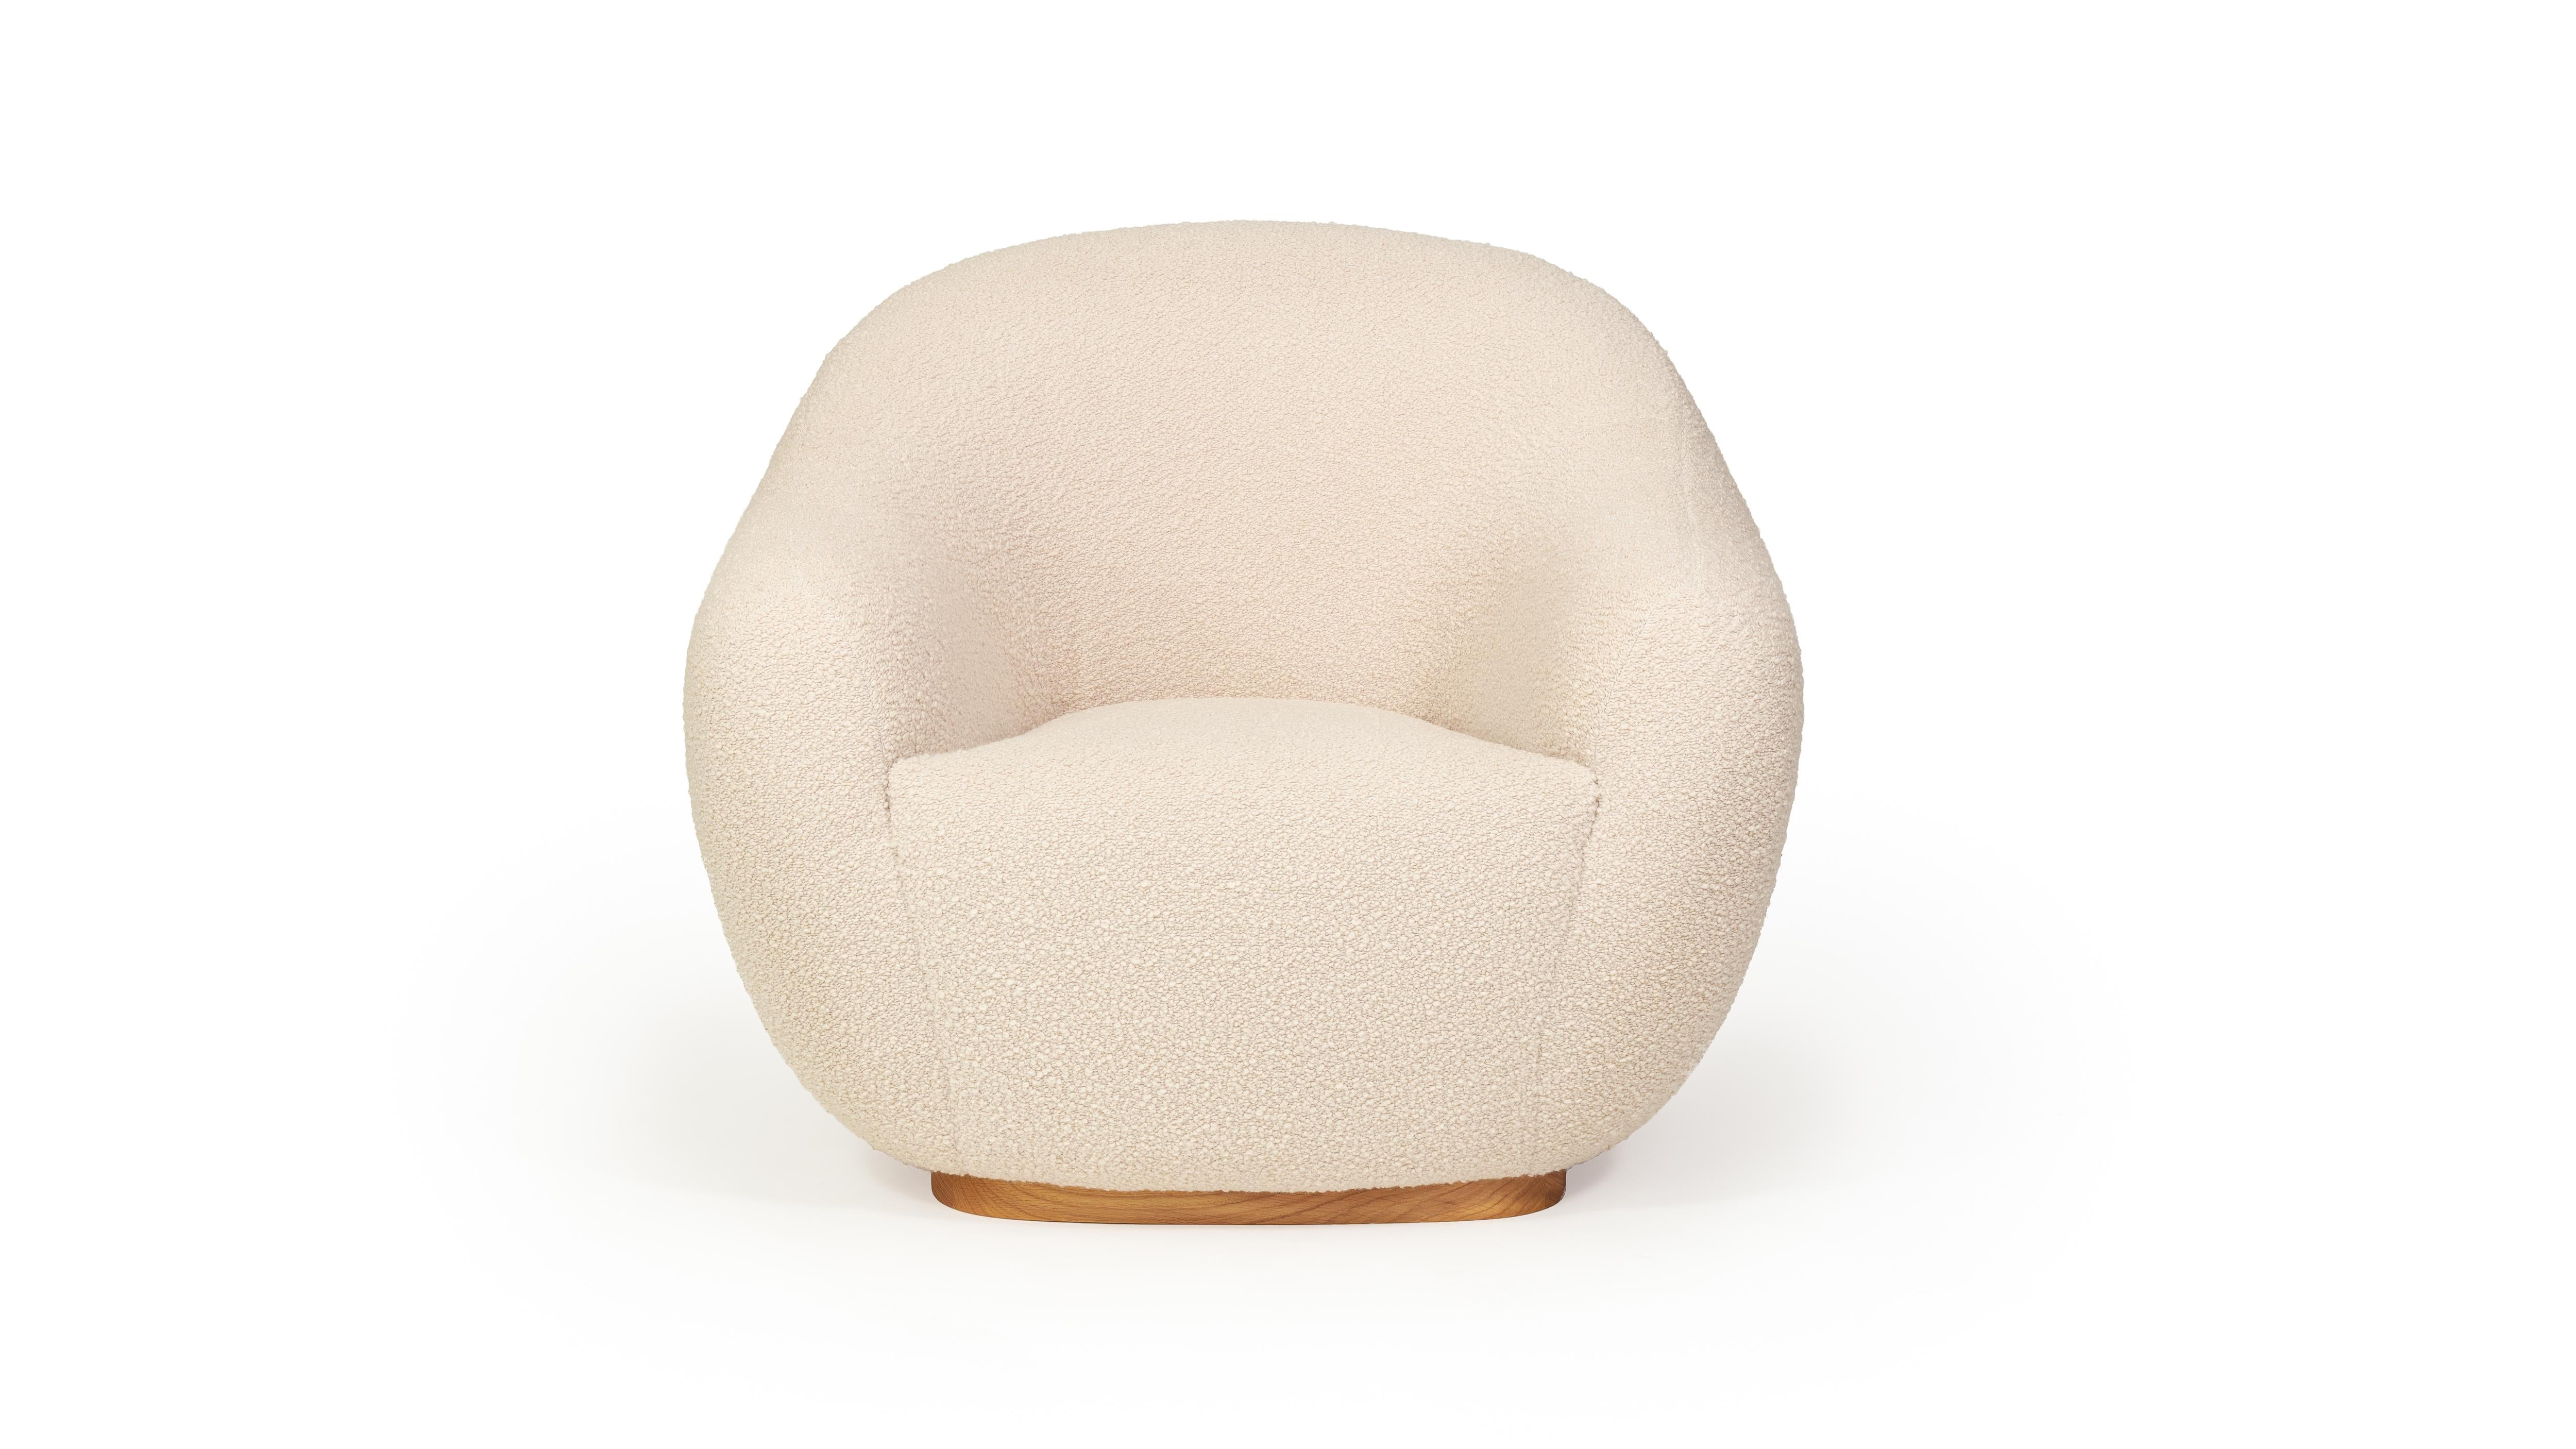 Niemeyer II Armchair by InsidherLand
Dimensions: D 92 x W 94 x H 86 cm.
Materials: oak., InsidherLand Woollen Ref. 1 fabric.
48 kg.
Available in different fabrics.

The Niemeyer II armchair is a redesign of the original Niemeyer armchair and named